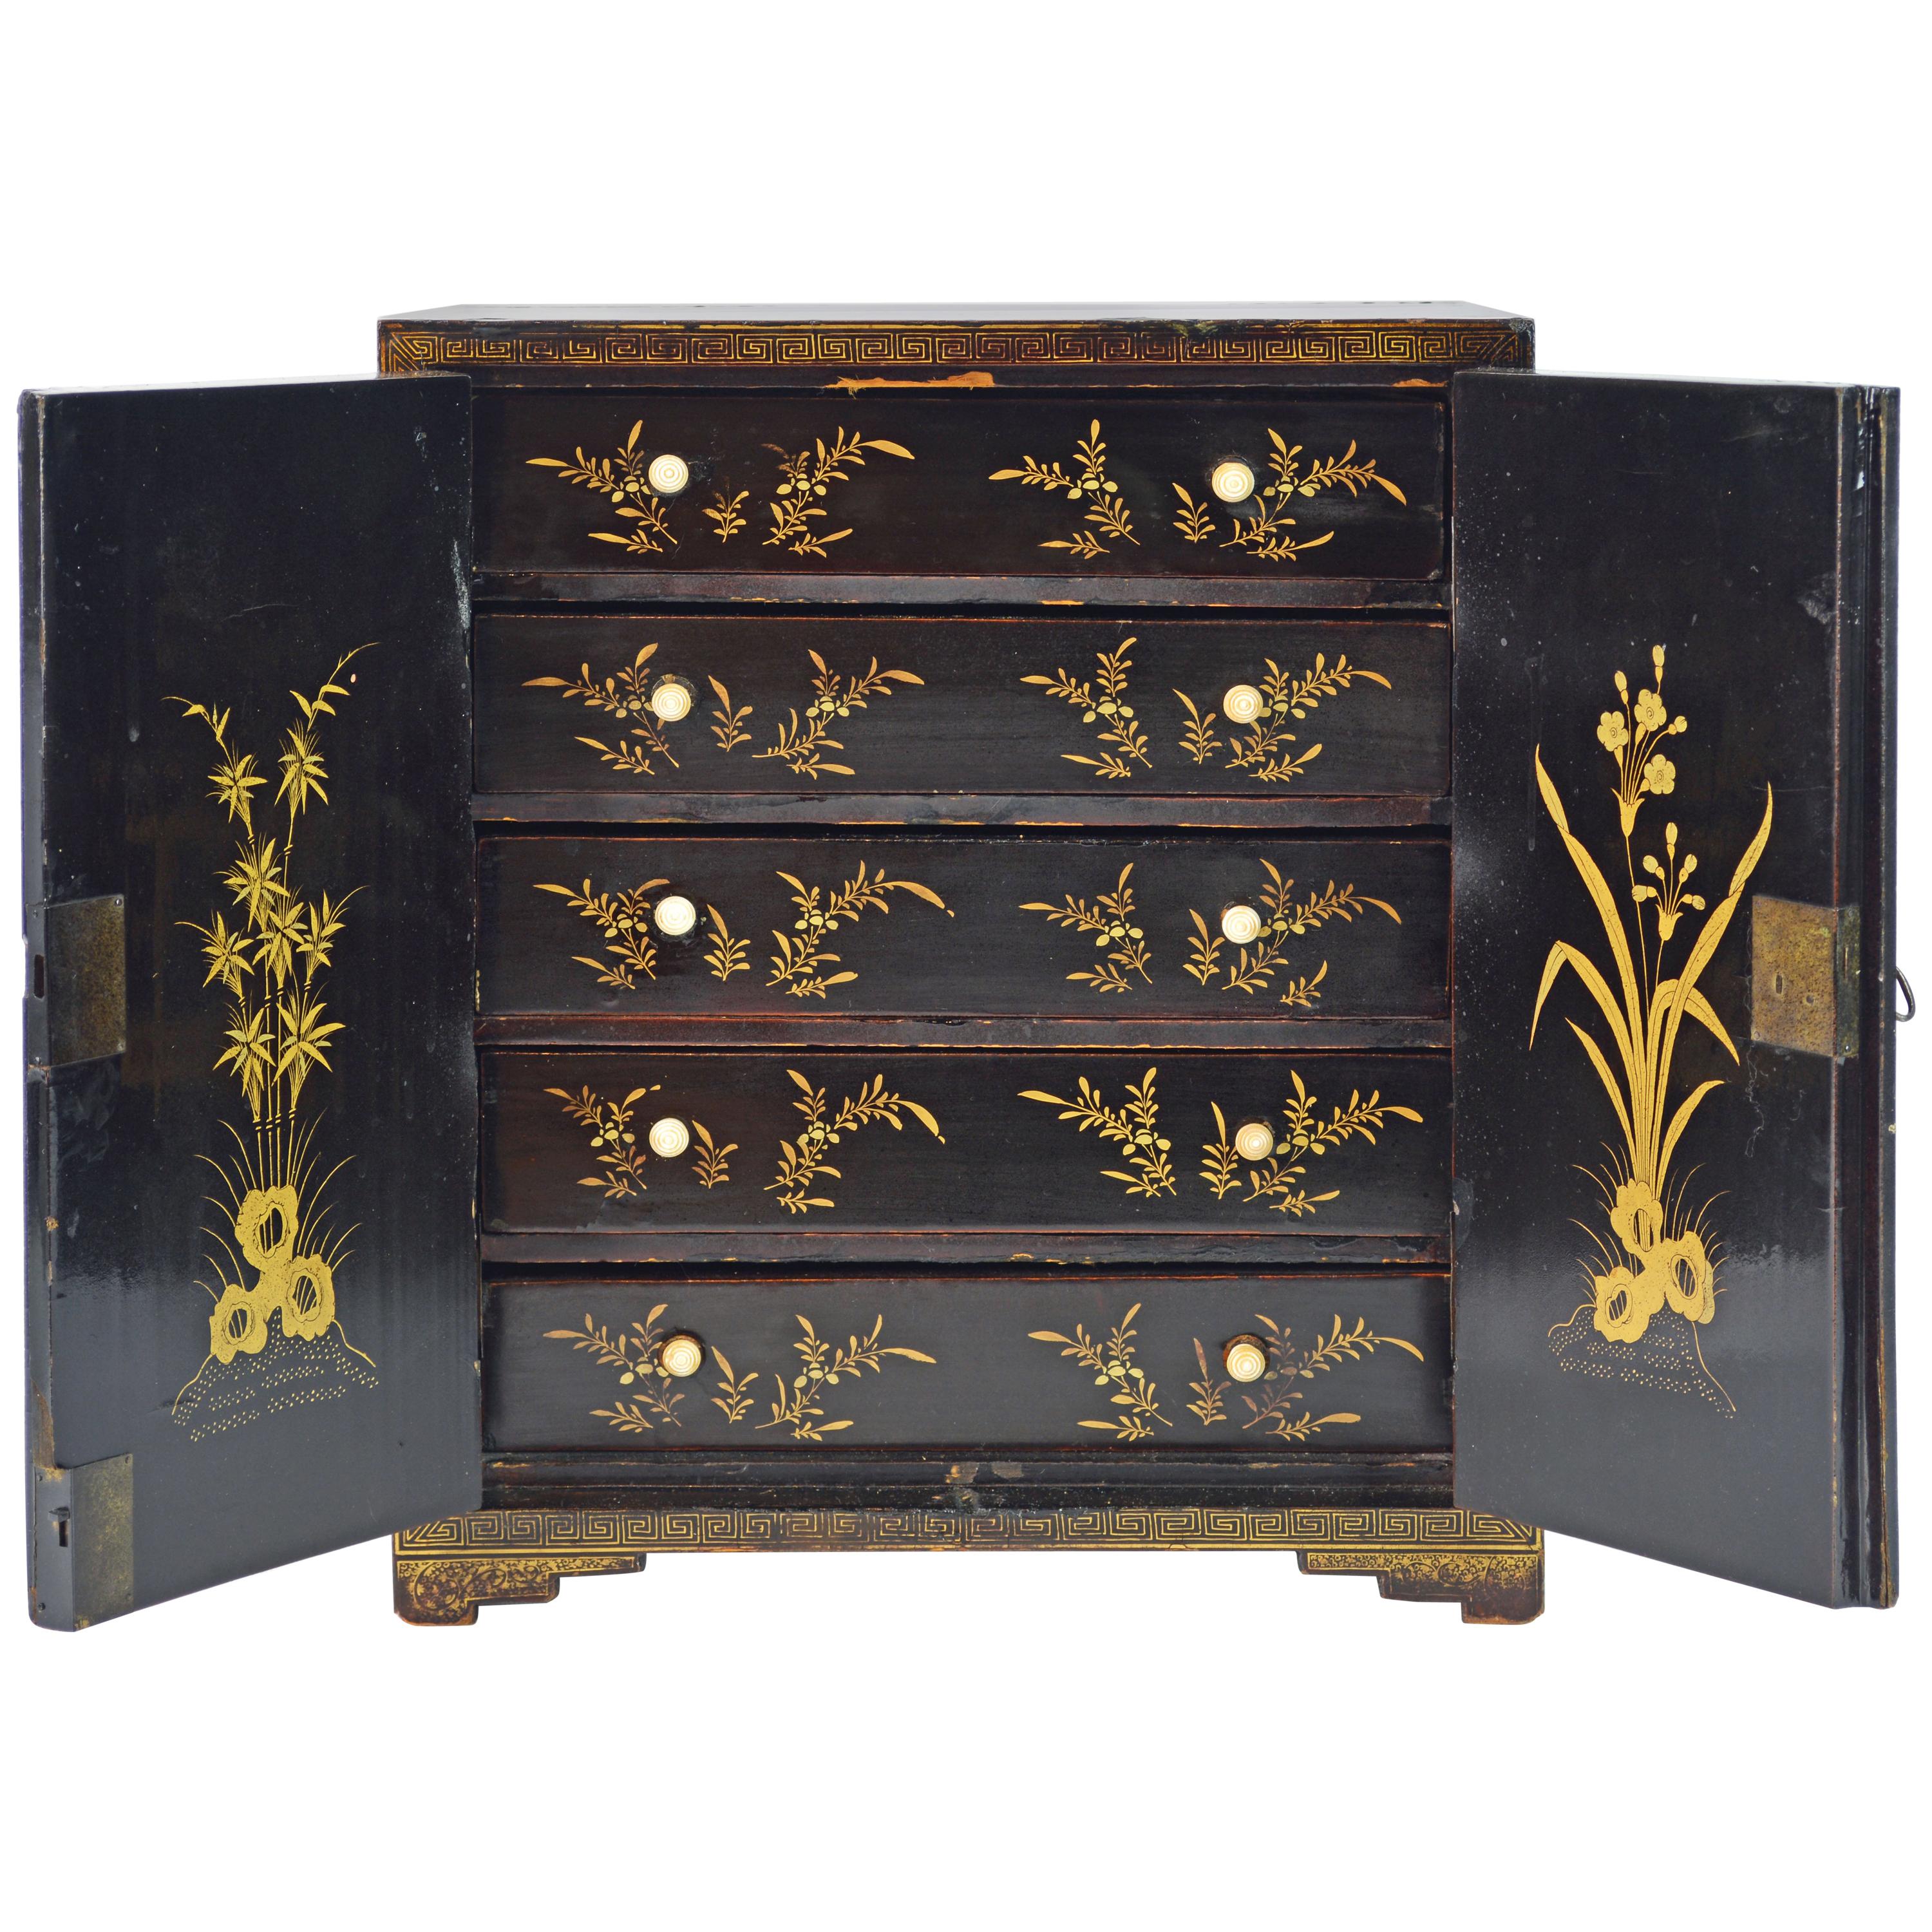 19th Century Chinese Miniature Lacquer and Gilt Table Cabinet or Jewelry Chest